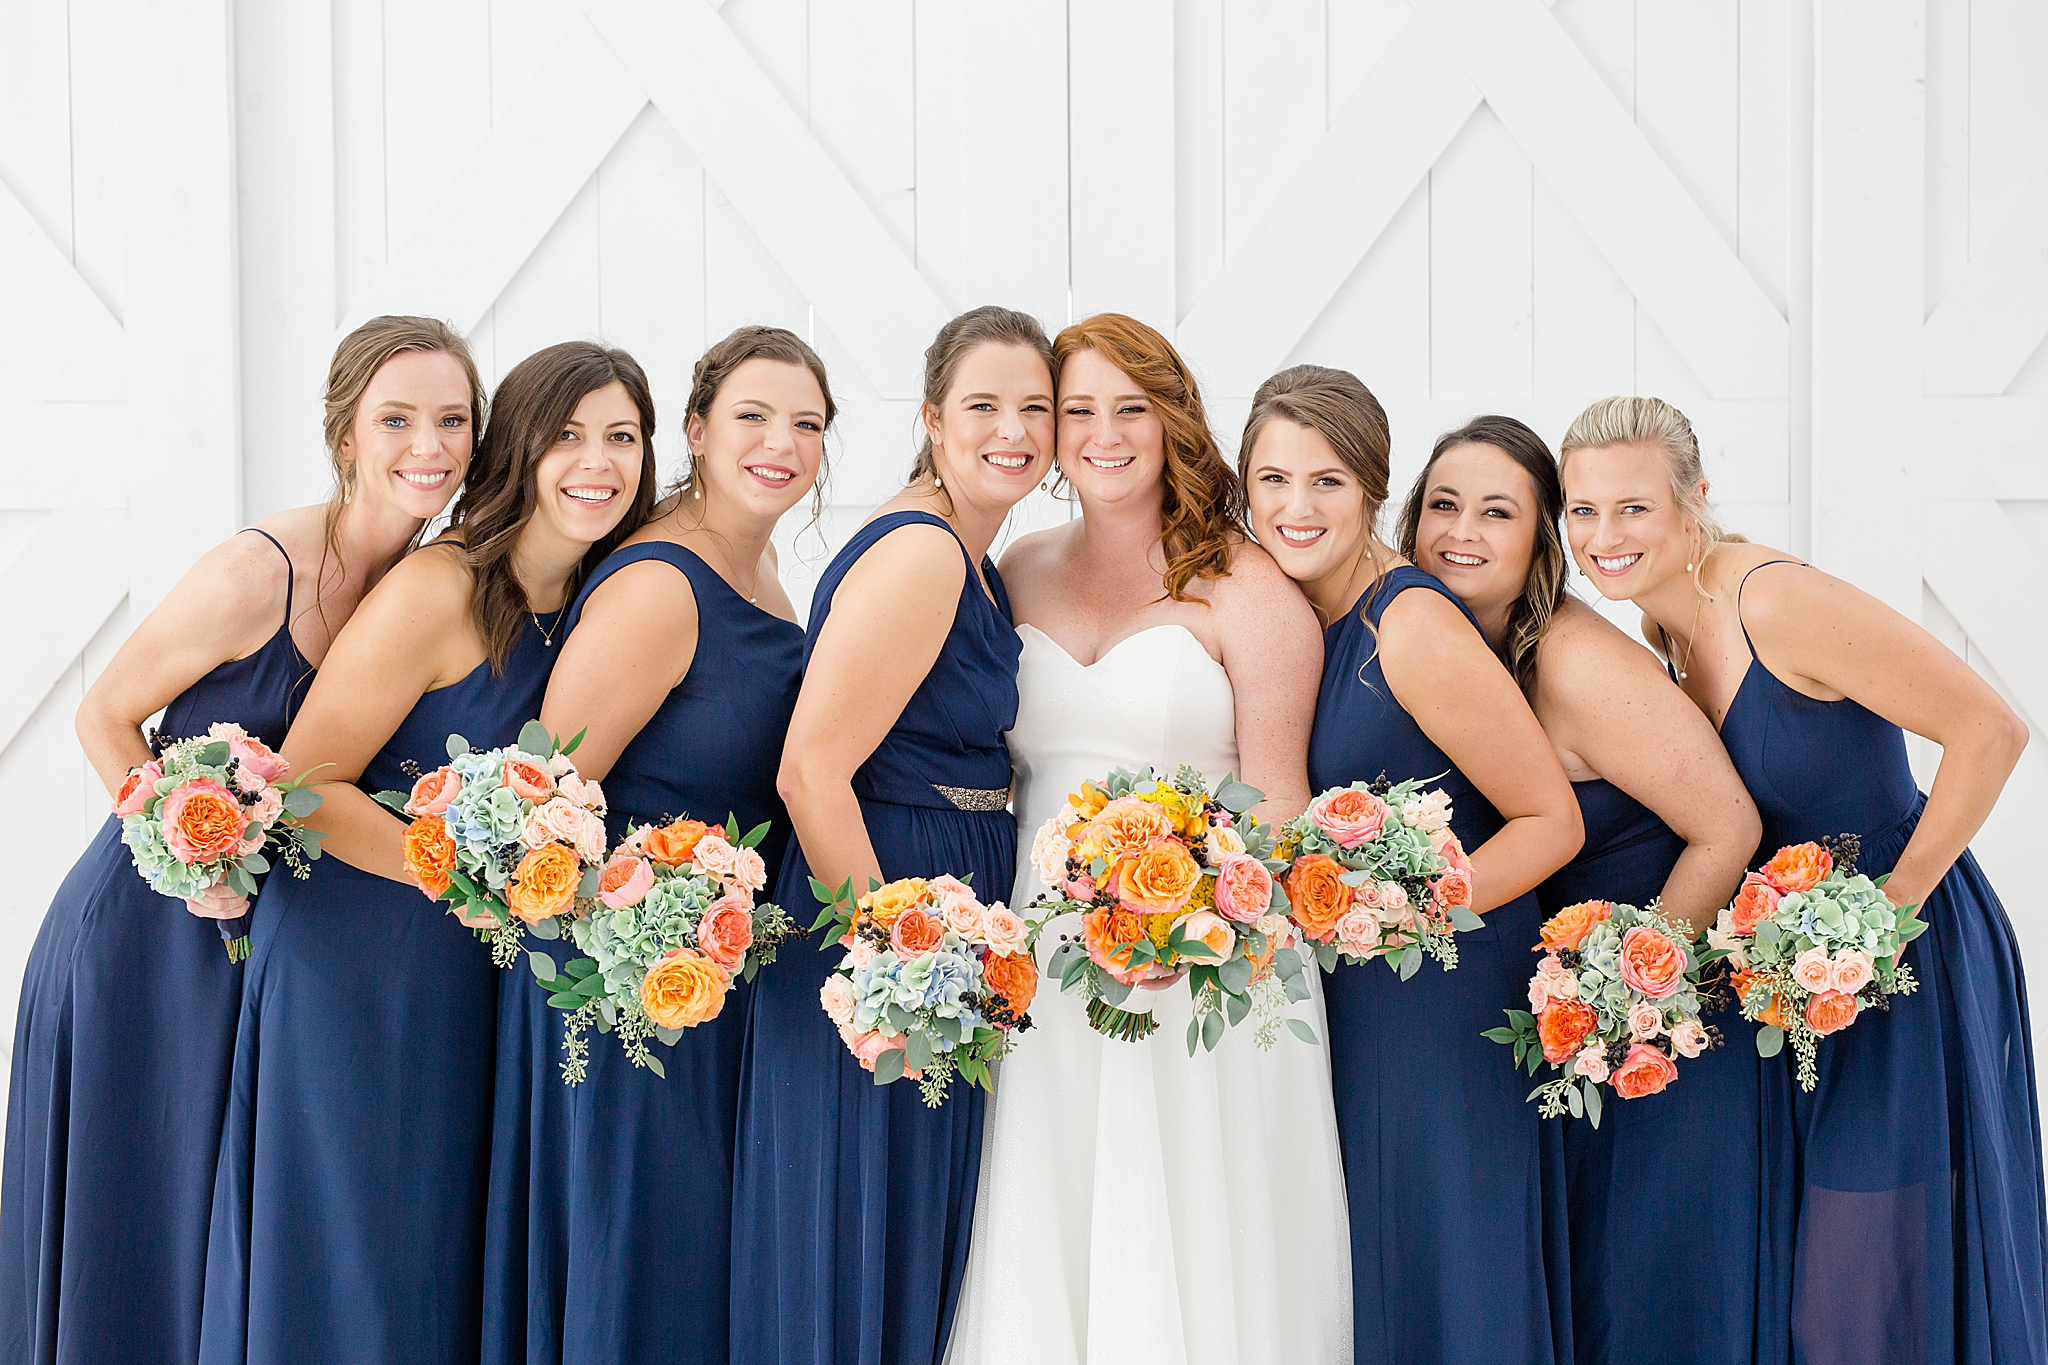 bride poses with bridesmaids in navy gowns